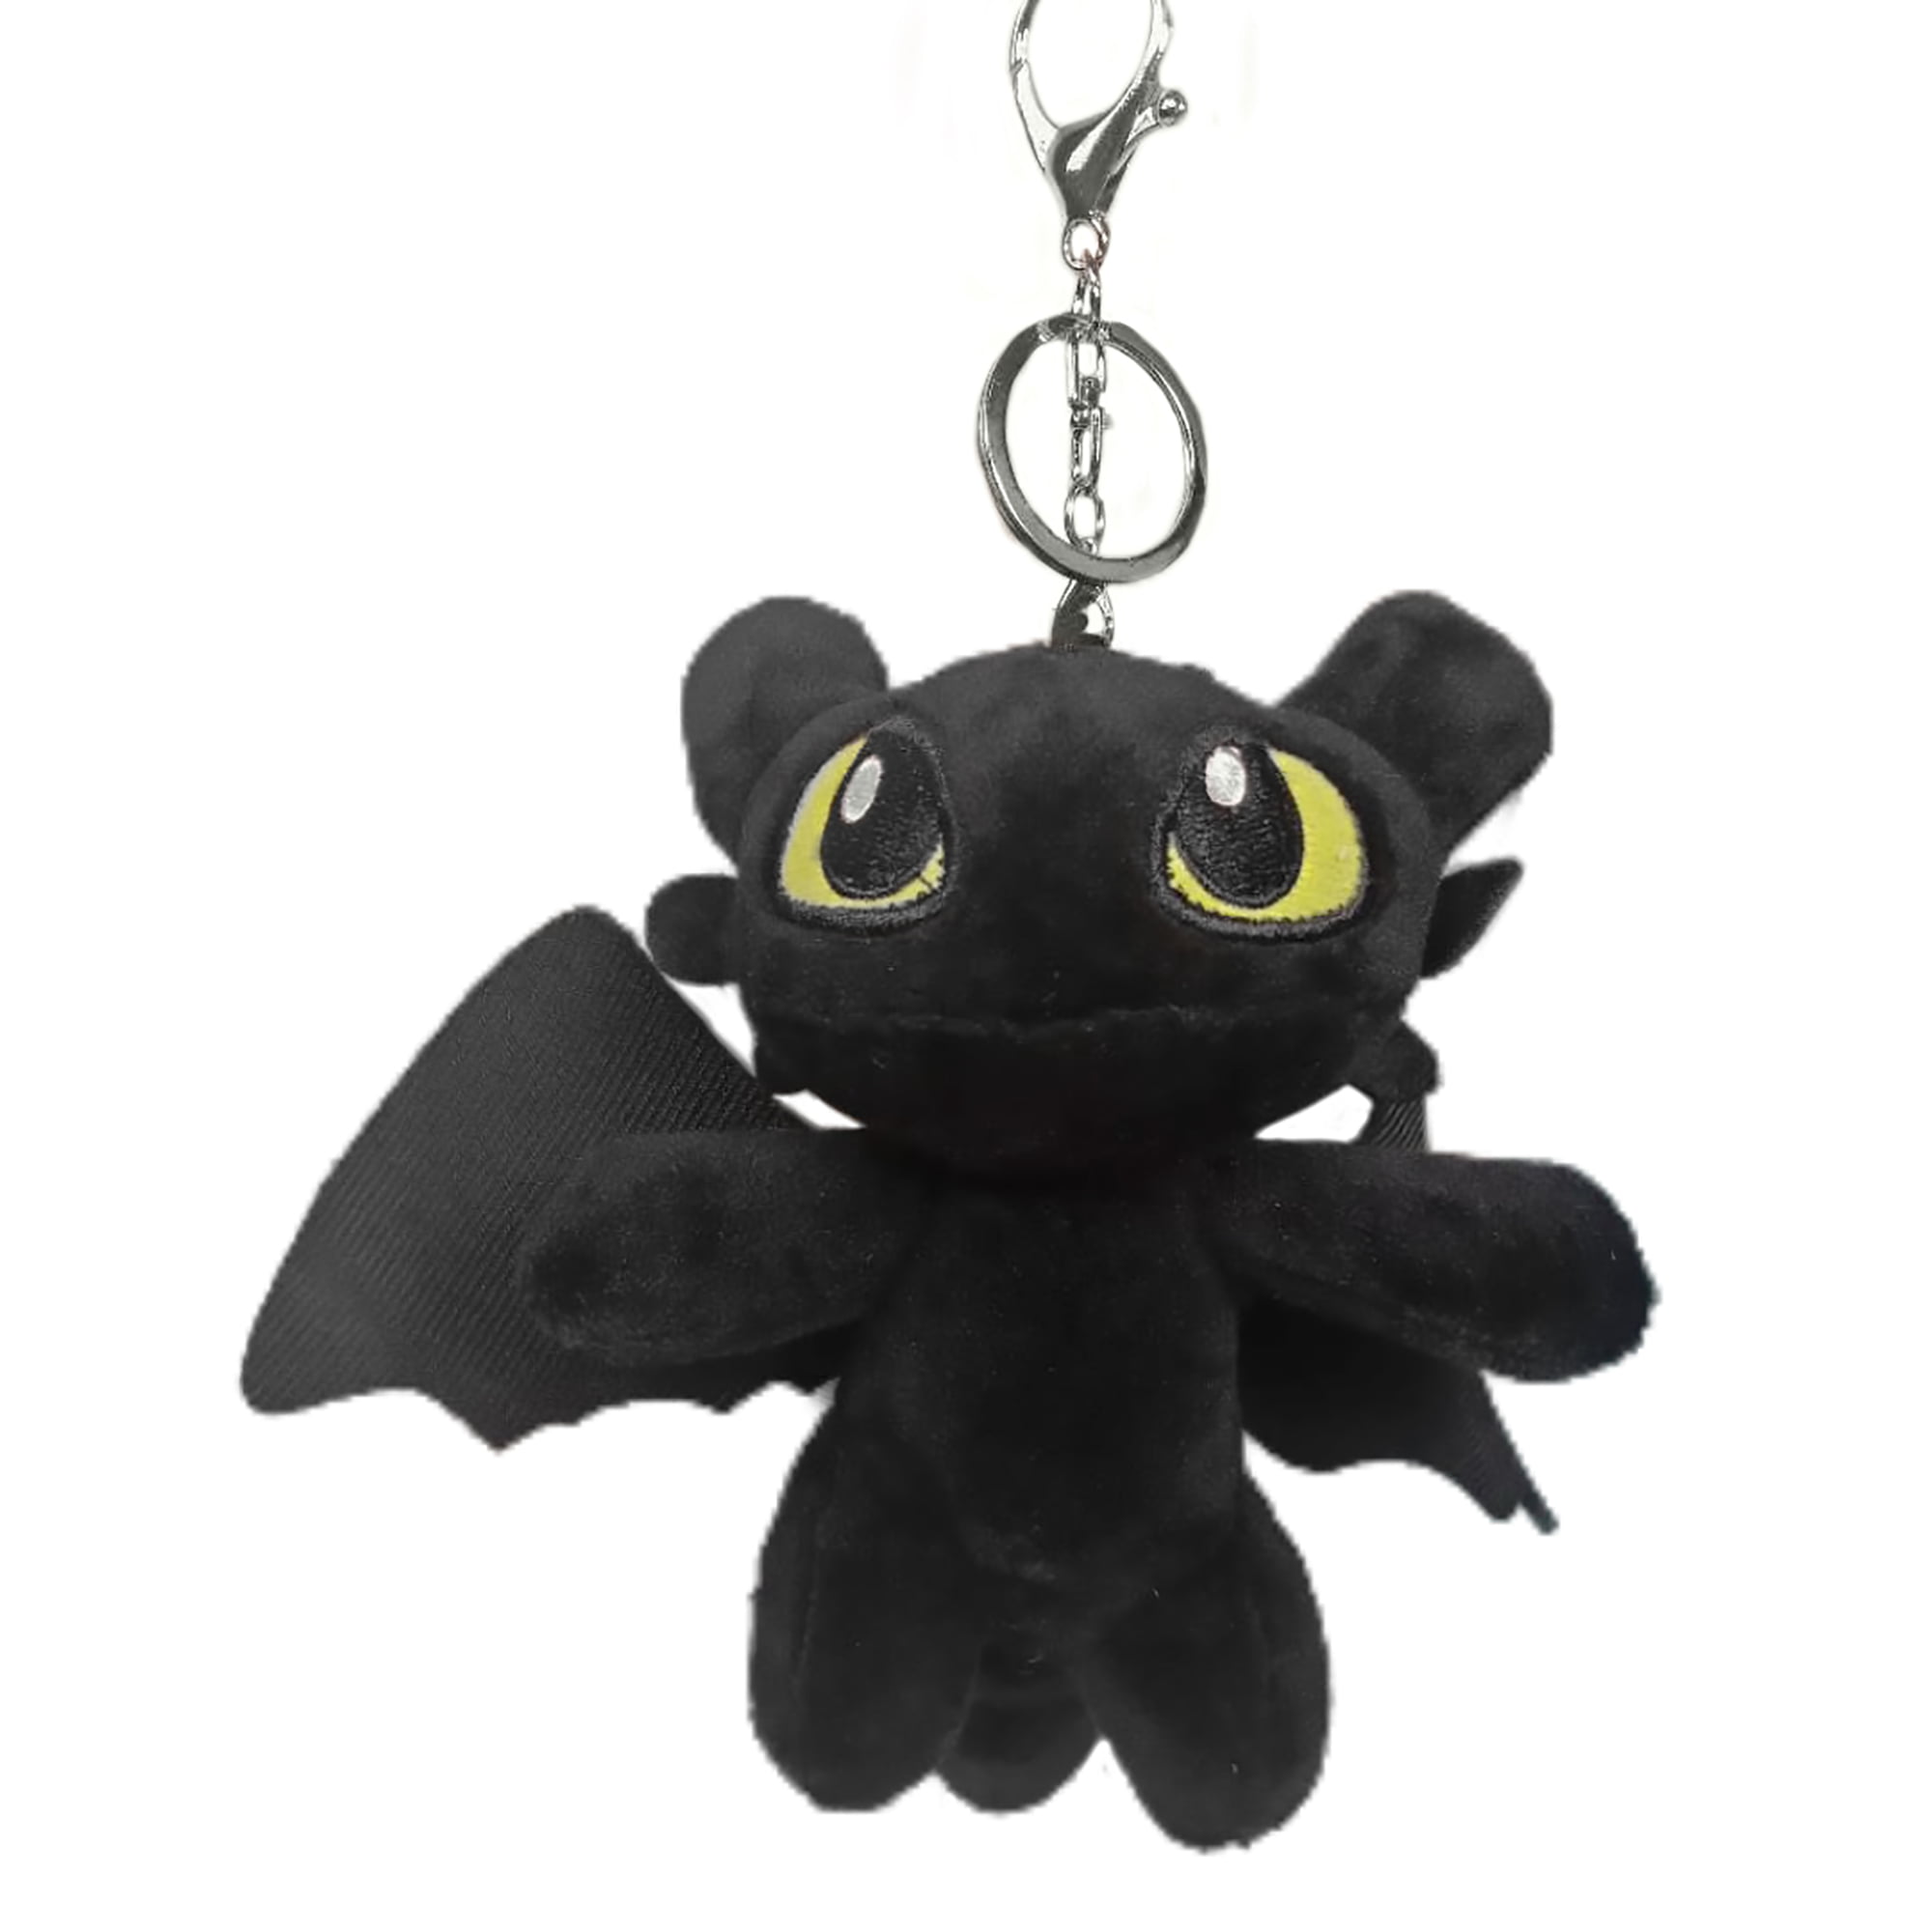 Buy ETERSTARLY 2 Pcs/Set 7 How to Train Your Dragon Plush Toy Toothless and Night  Fury Stuffed Animals for Kids Gift Online at Lowest Price in Ubuy Nepal.  842624911